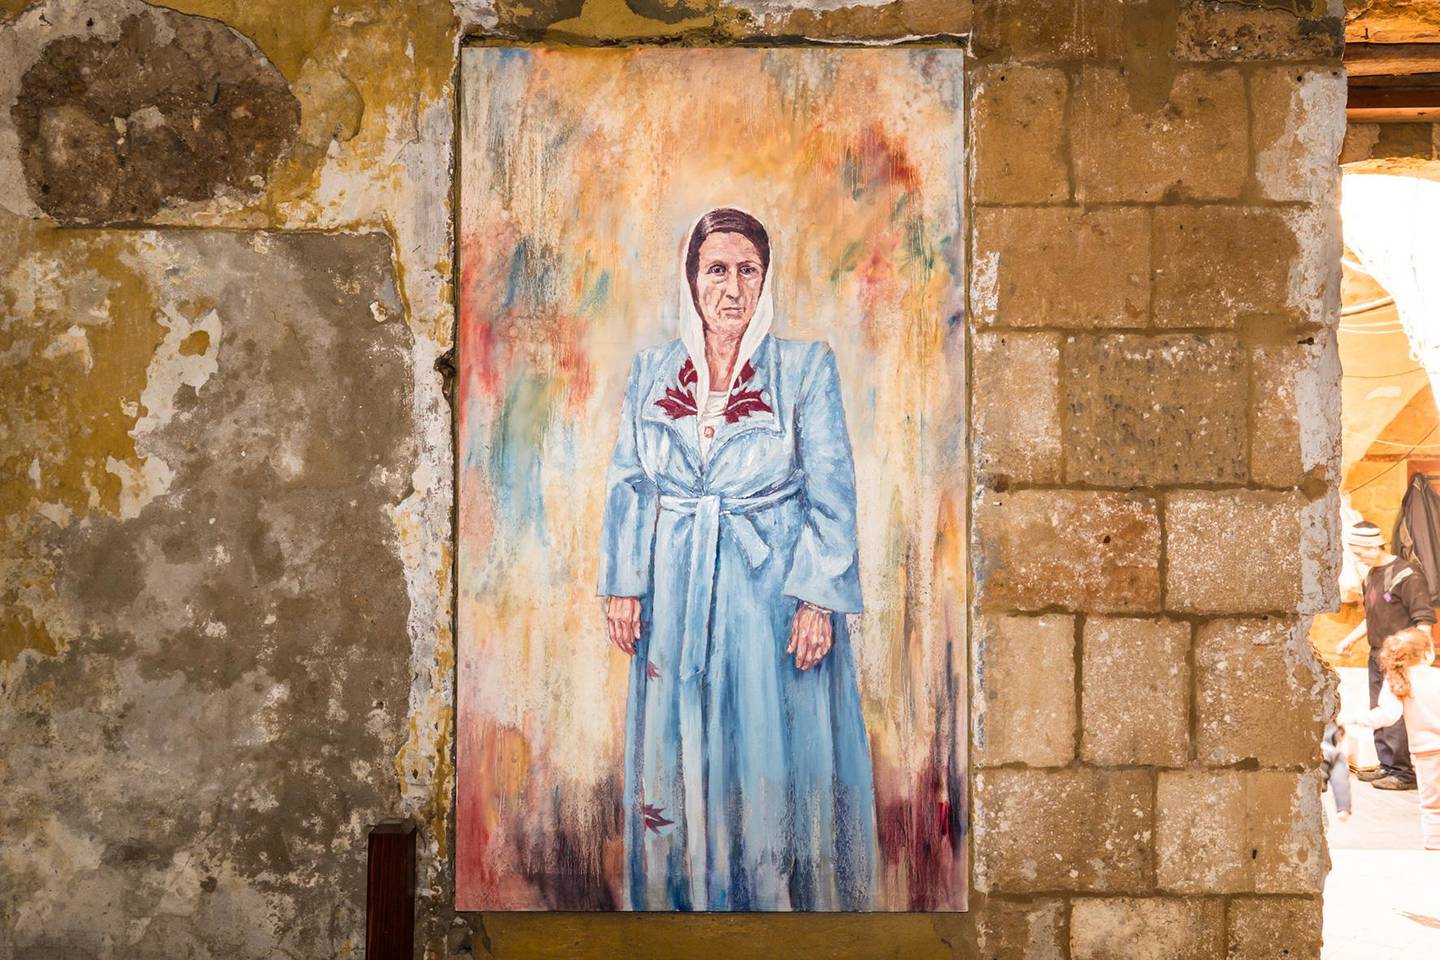 Young's paintings of former Hammam Al-Jadded owner Zahia Al Zarif, based on an archival photo of her from the 1940s. Karim Sakr 